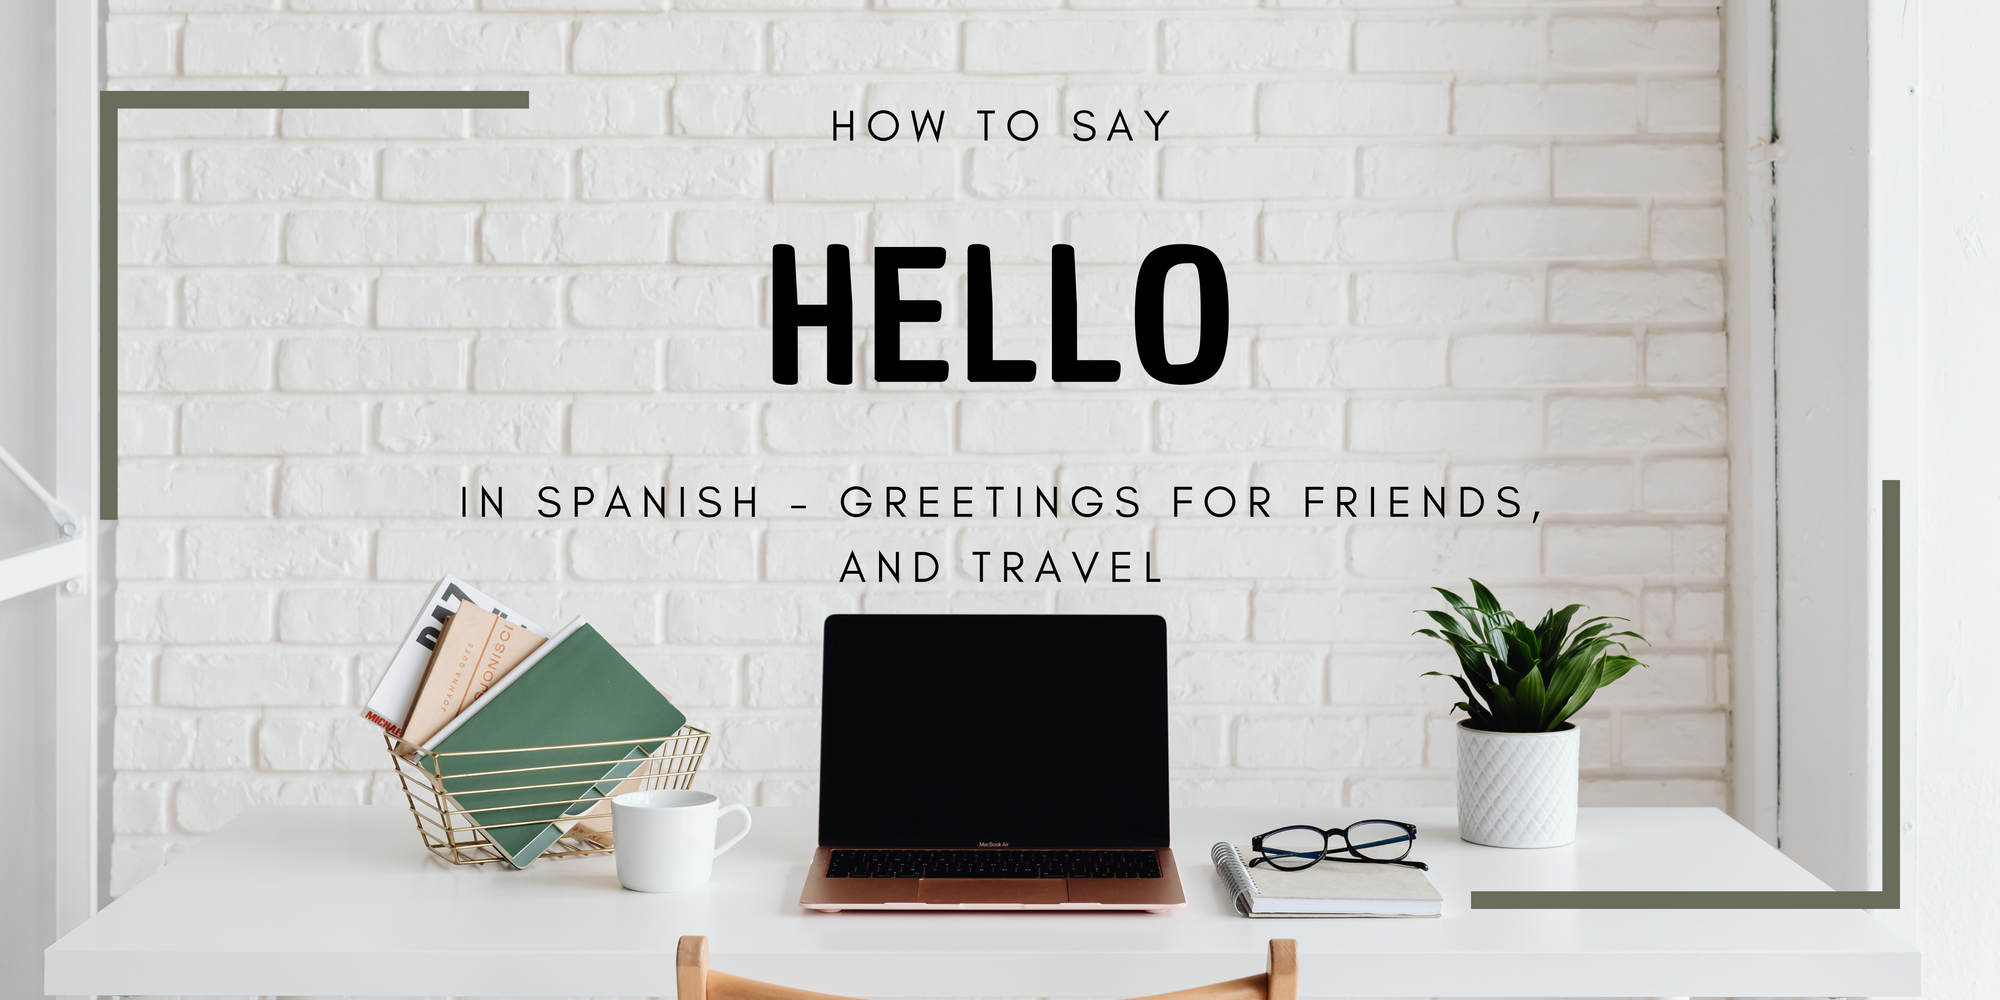 How to say hello in Spanish - greetings for friends, and travel